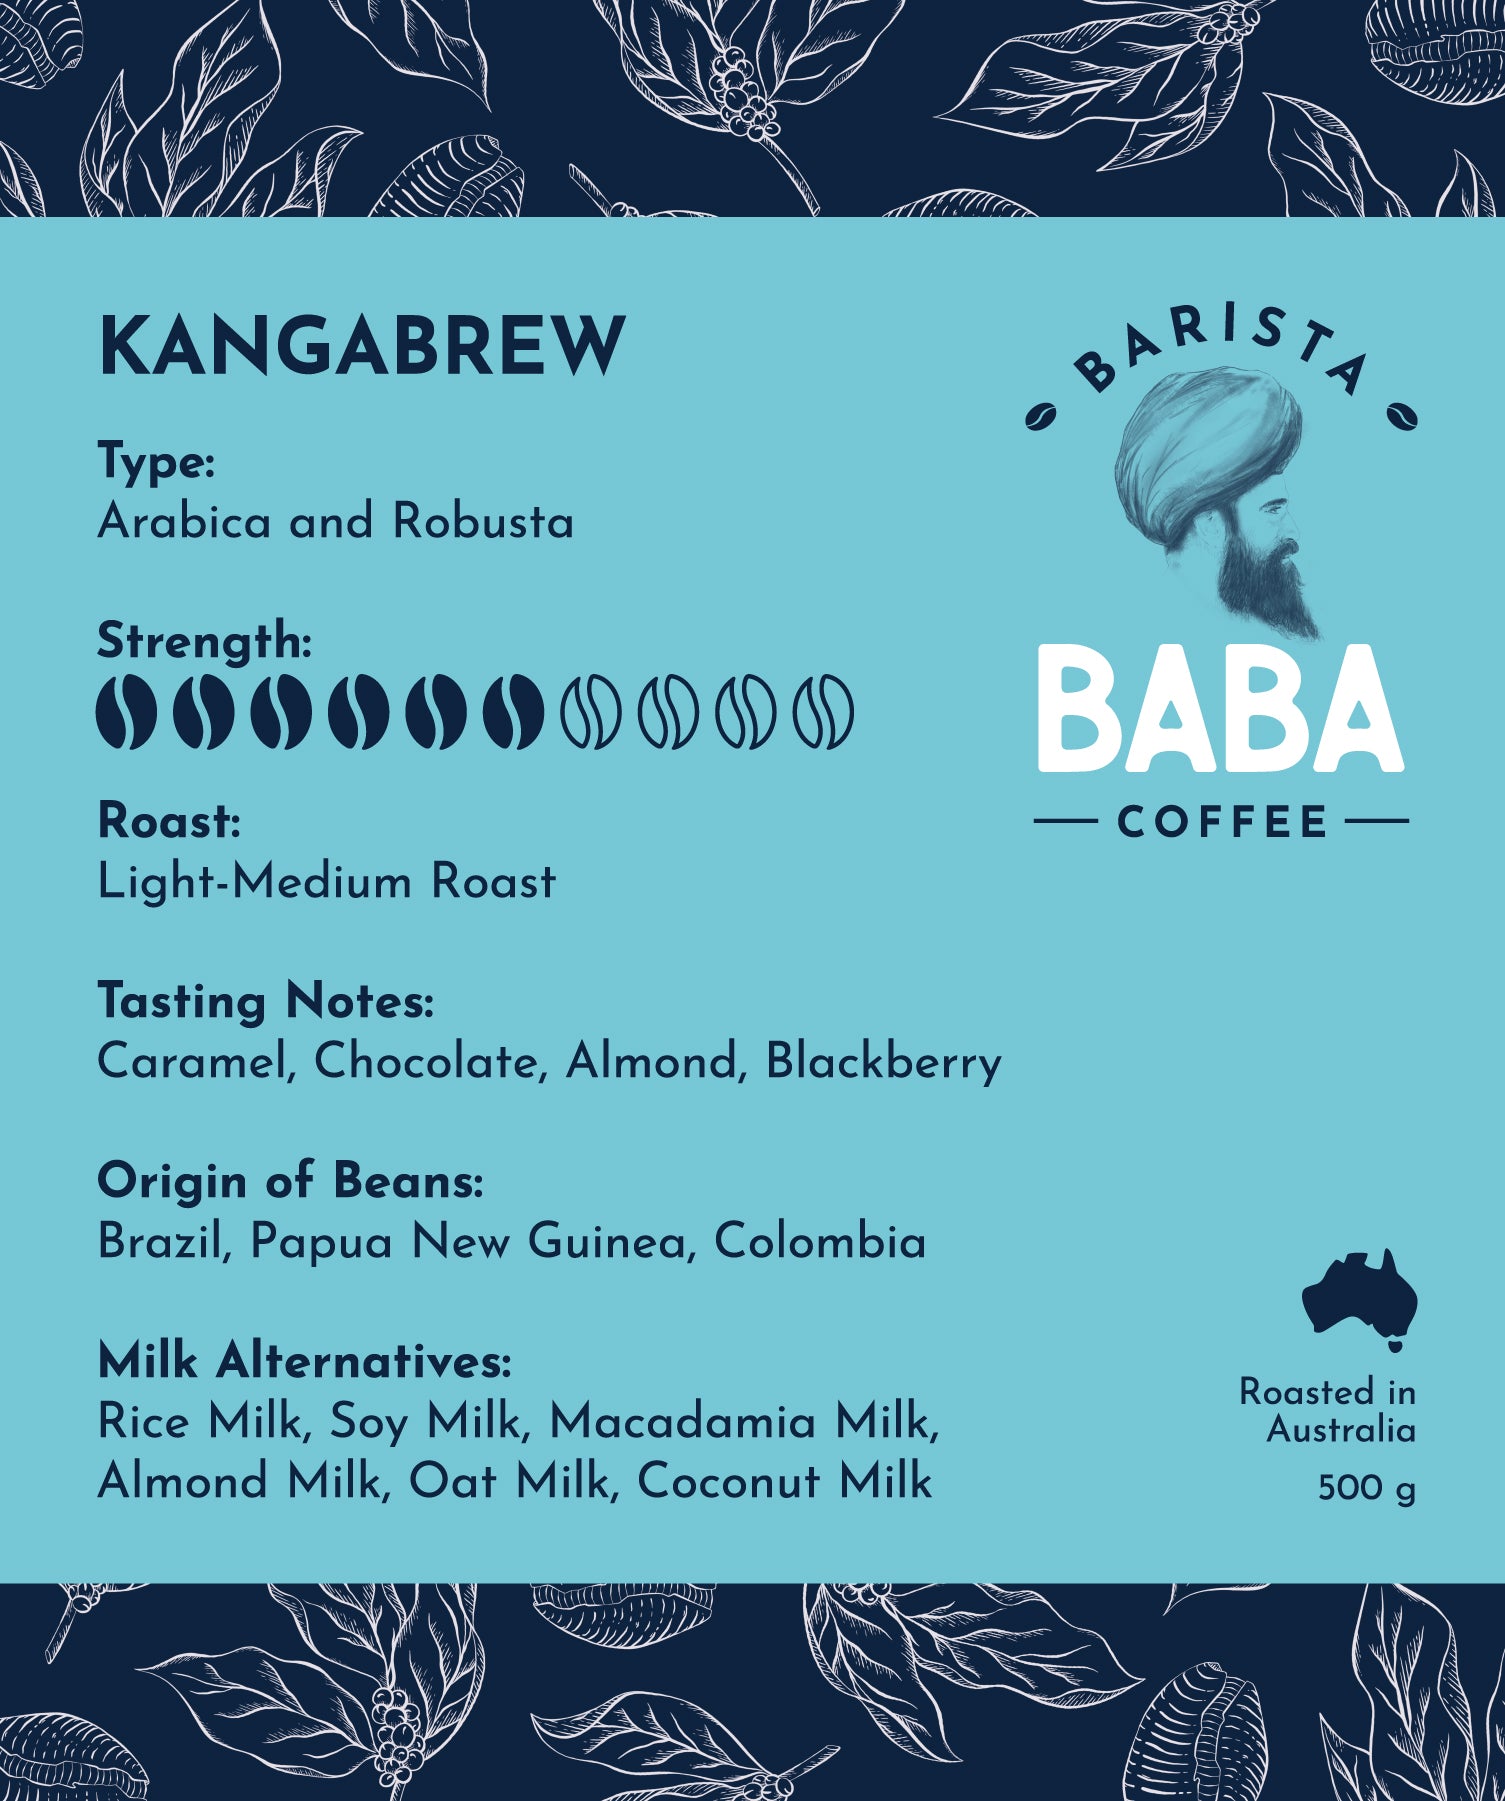 Label of a 500g bag of Kangabrew coffee beans by Barista Baba Coffee